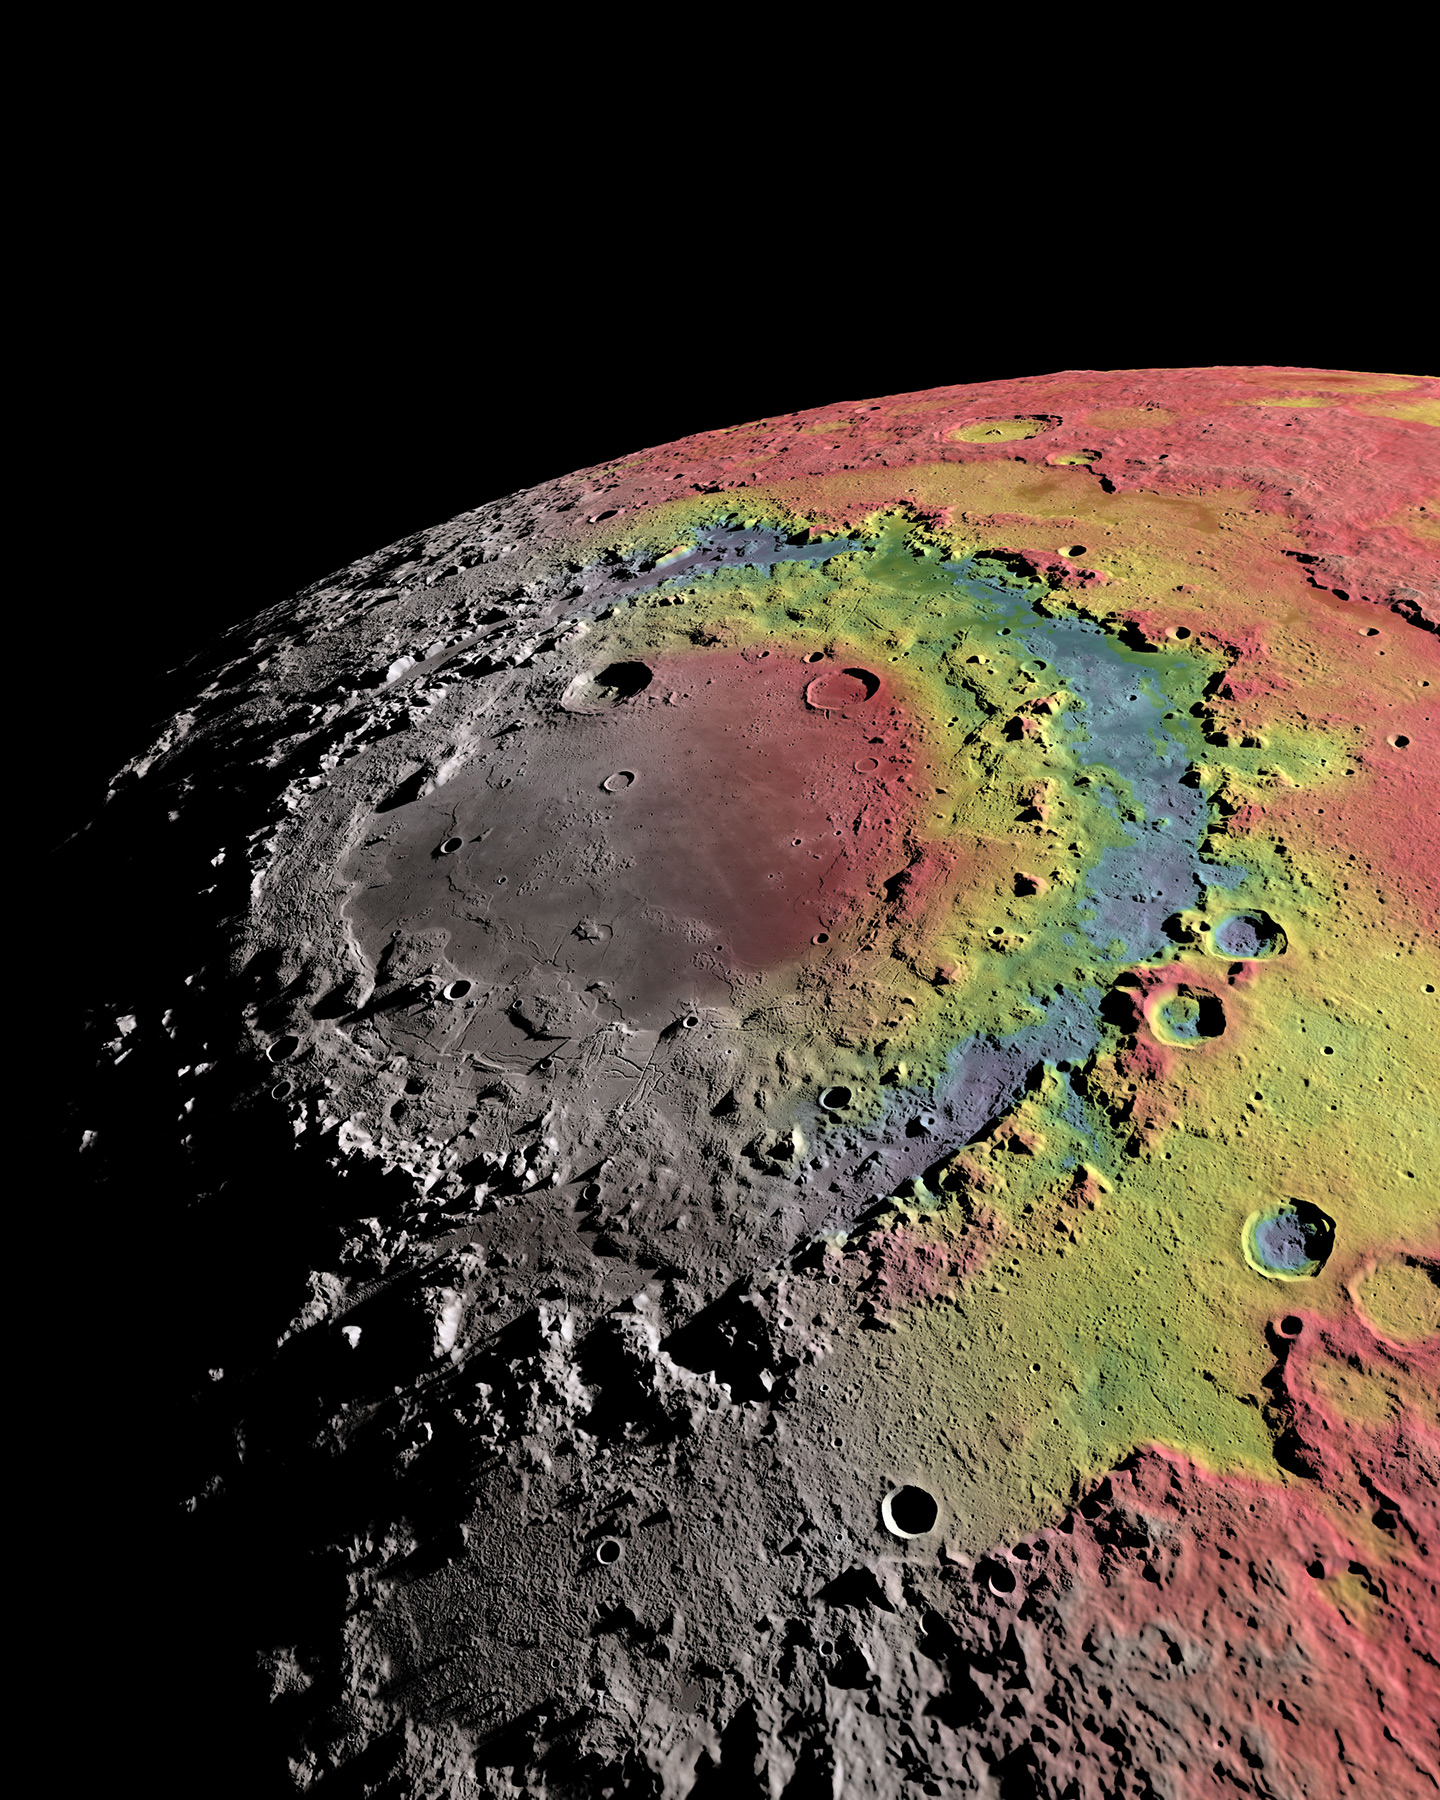 Orientale basin on the moon colored red to blue, showing differences in gravitational signature